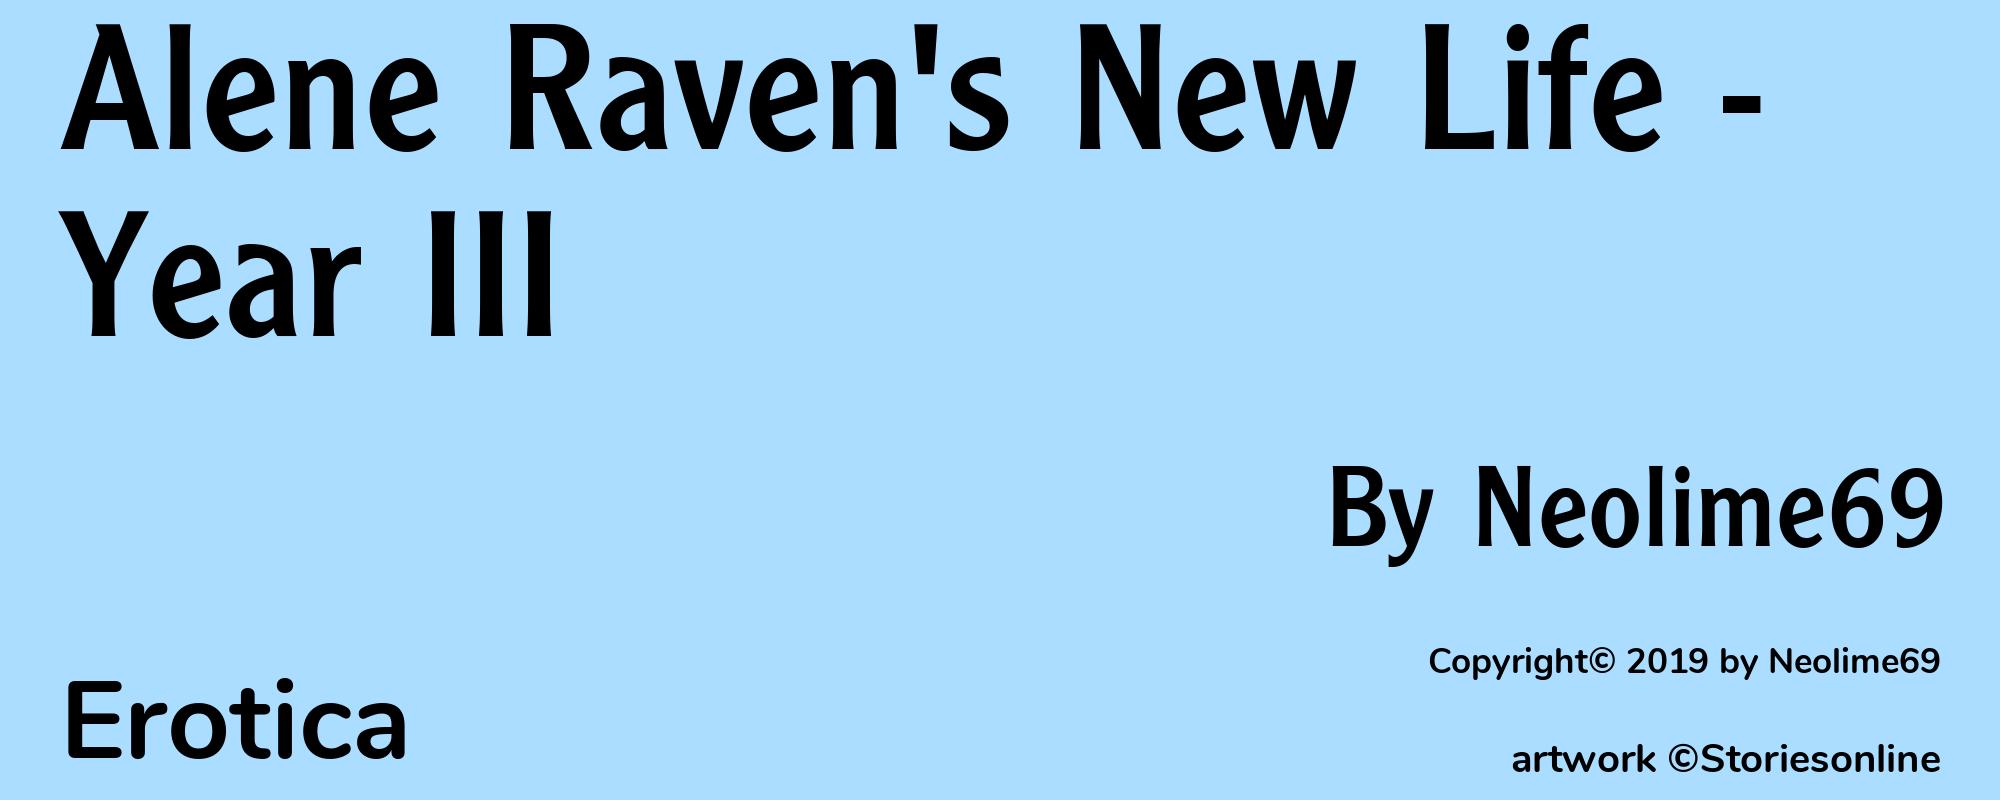 Alene Raven's New Life - Year III - Cover